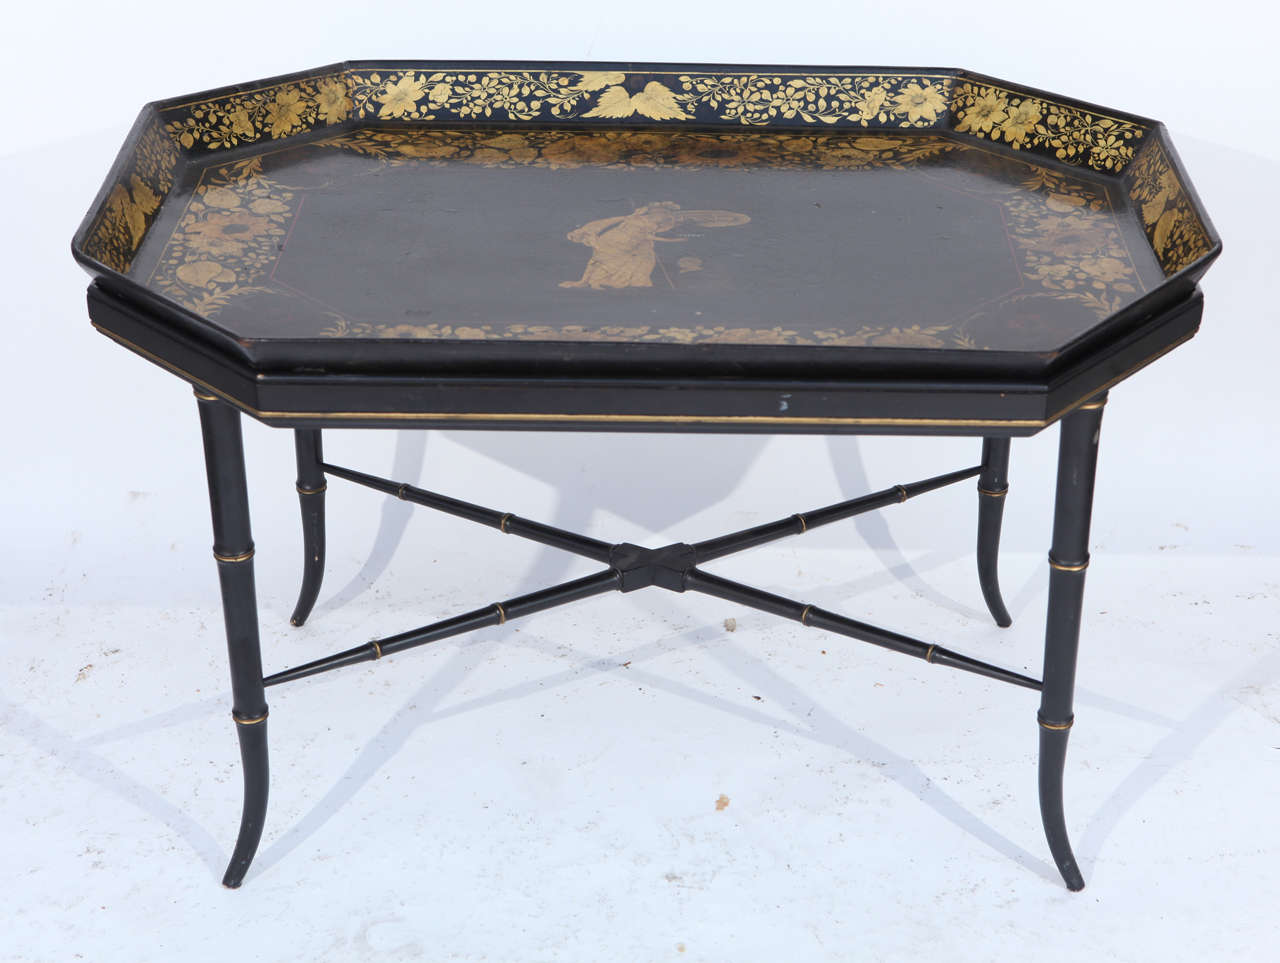 19th century papier mâché table on later stand. This tray has gilt details and a neoclassical motif. It is signed by the maker.